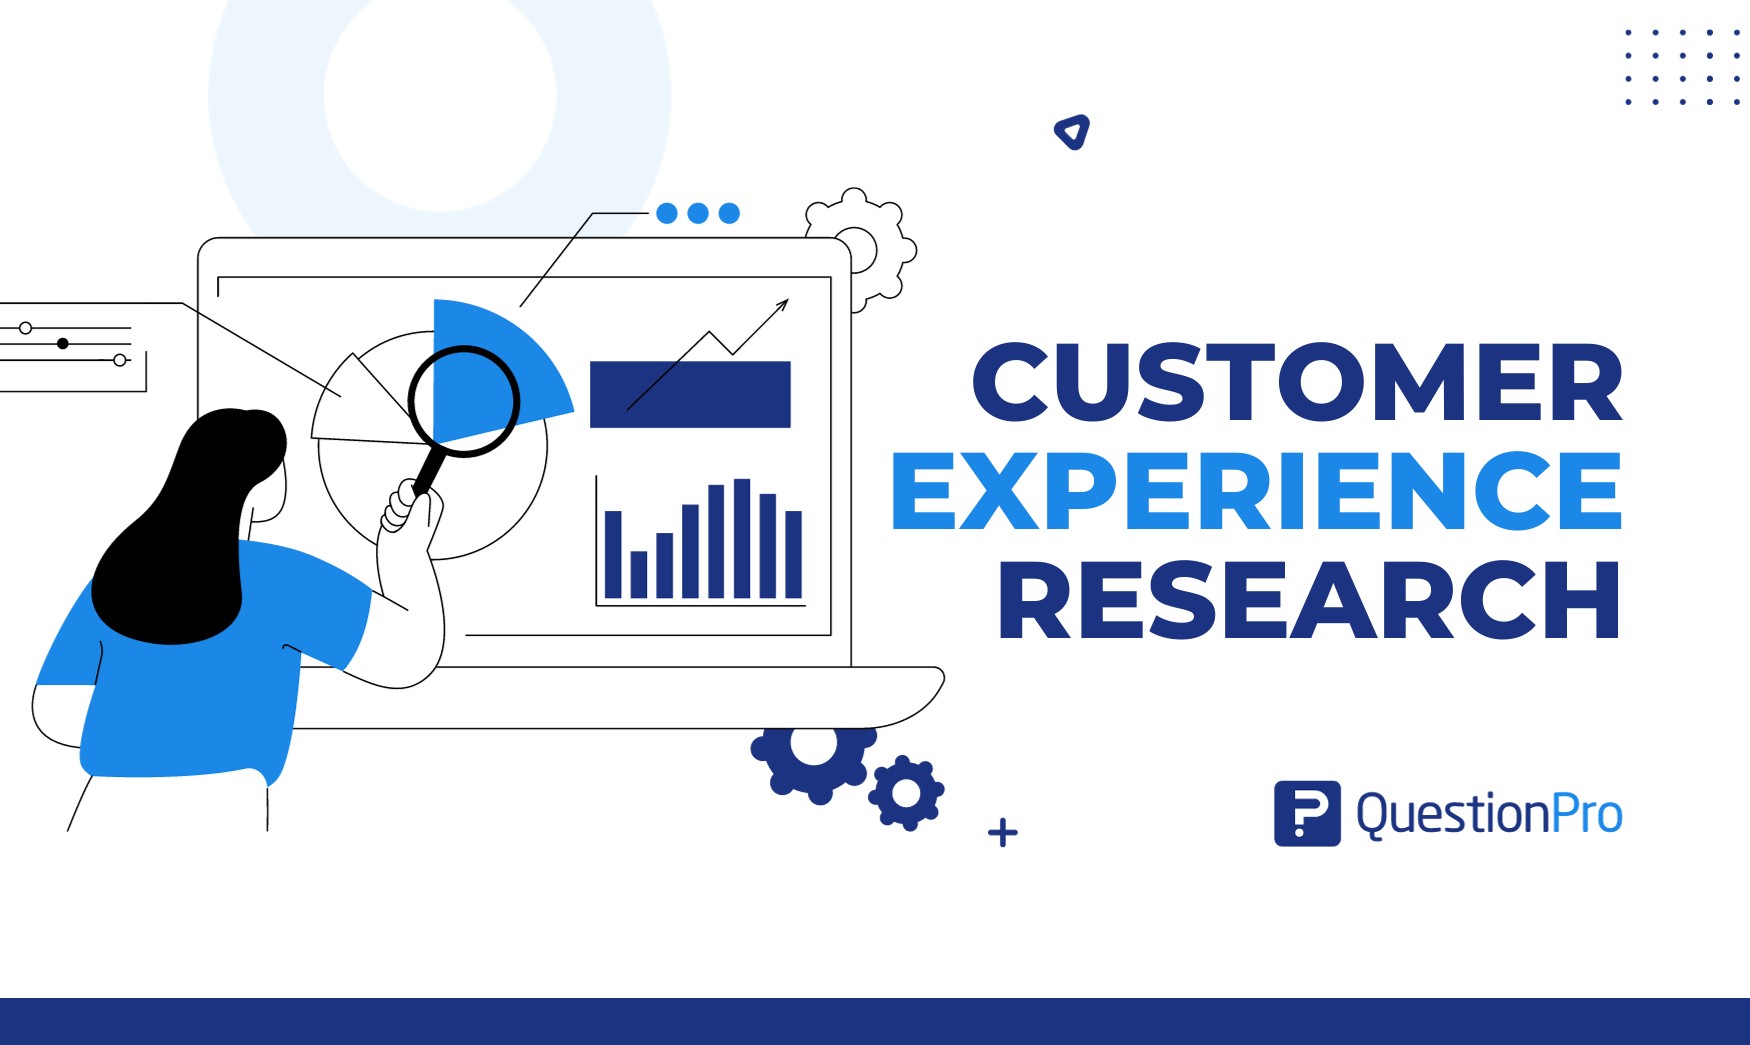 Customer experience research